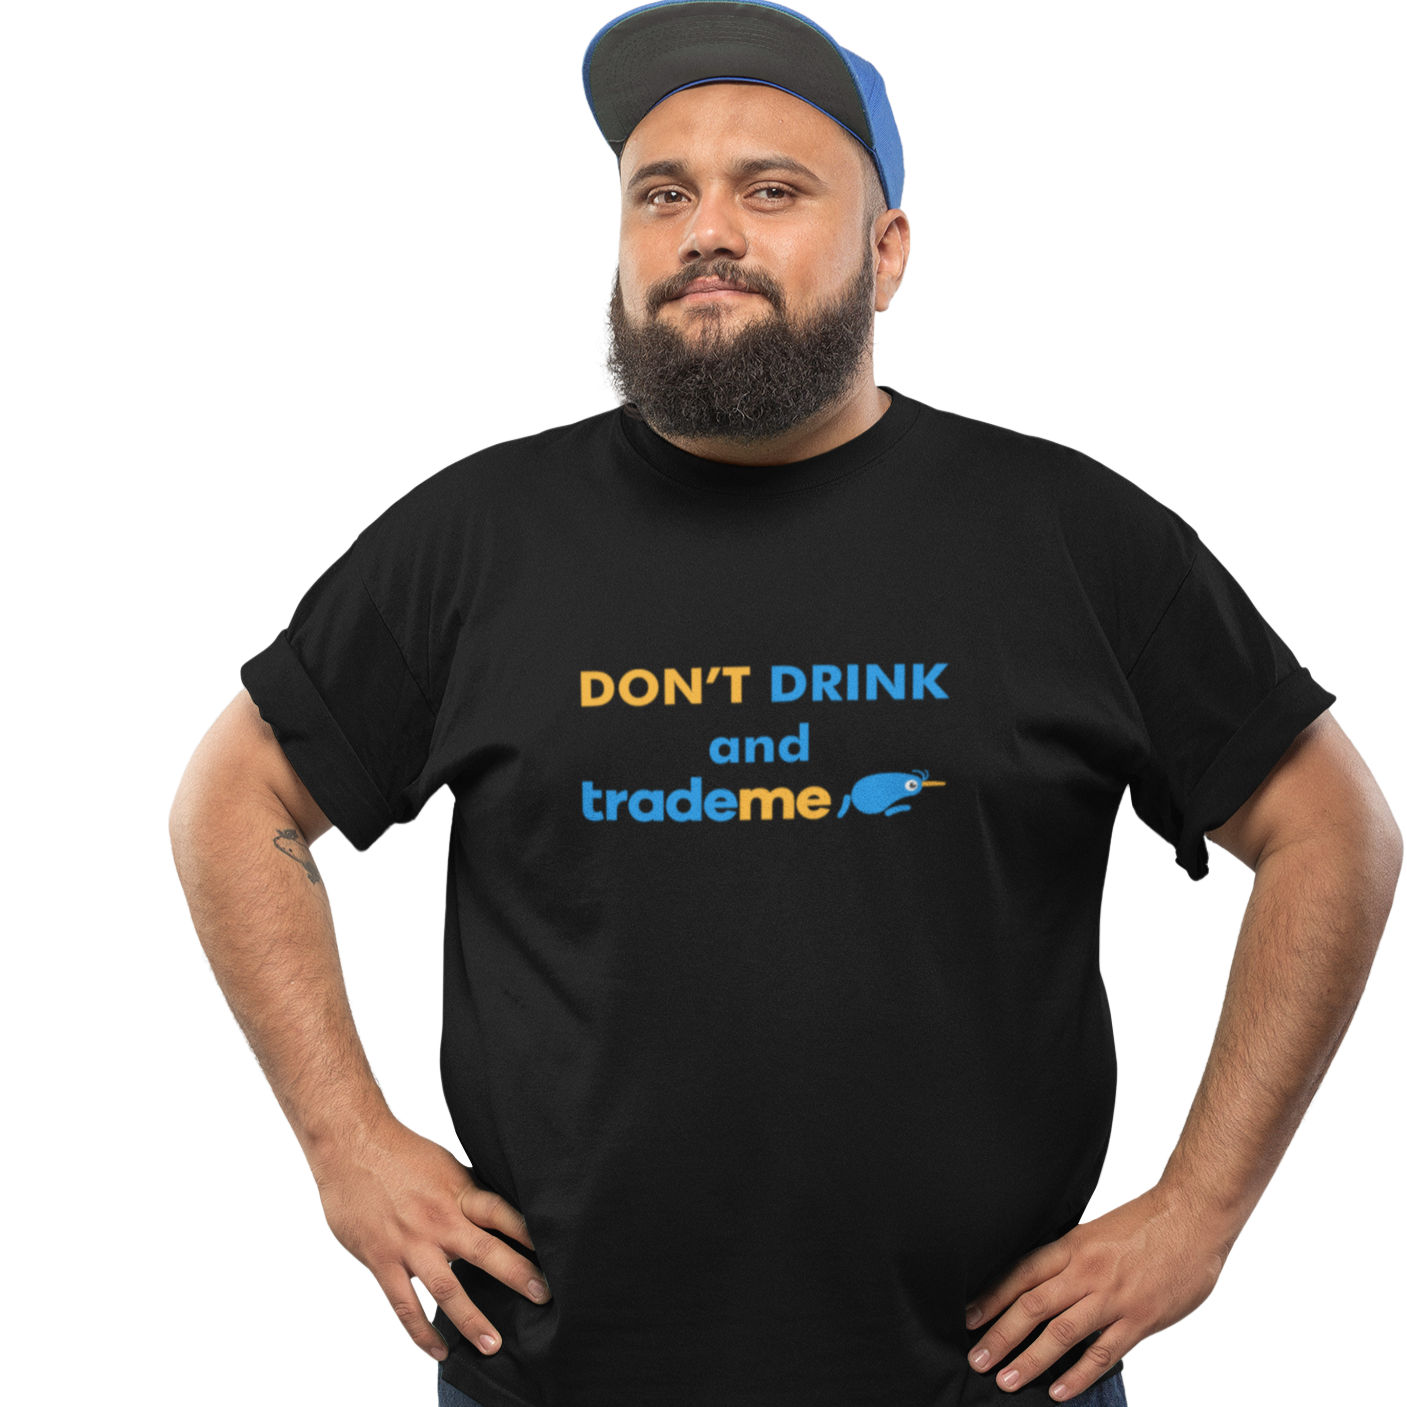 Don't Drink and Trade me teeshirt